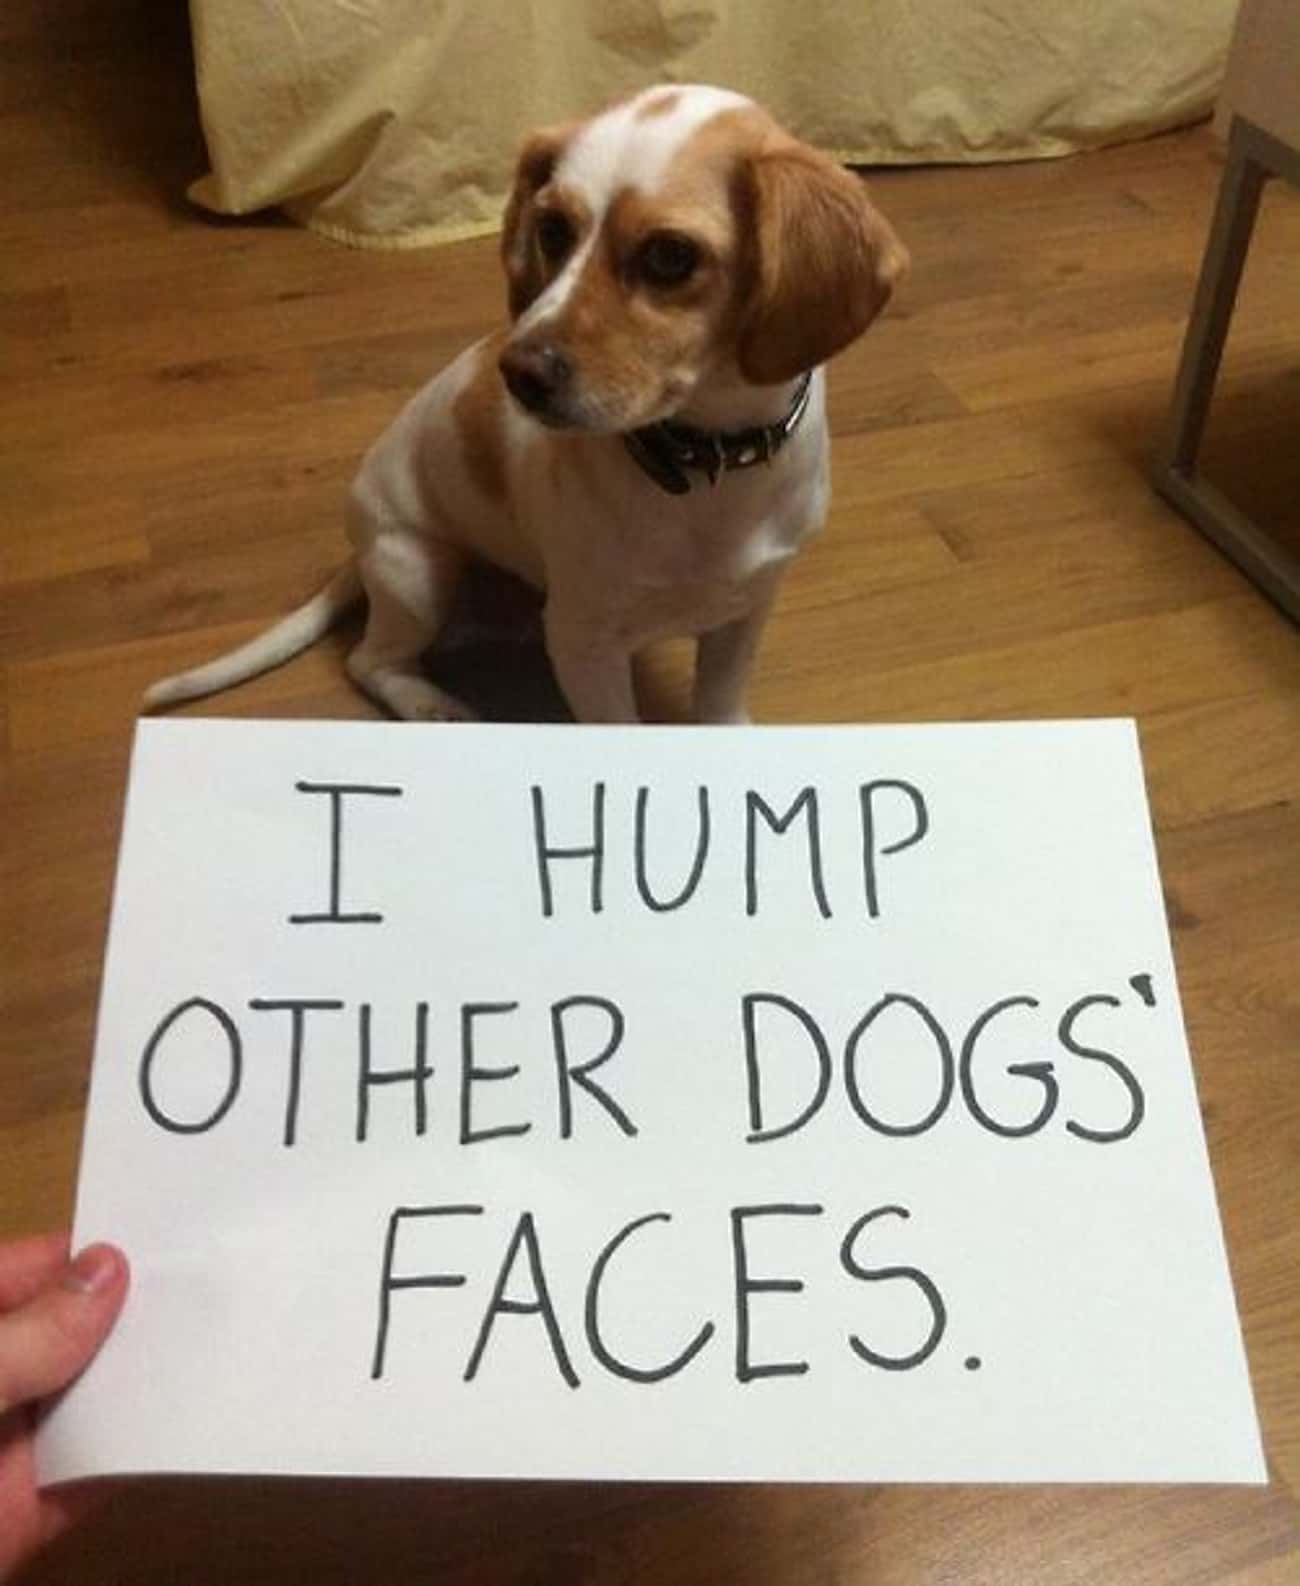 'I Hump Other Dogs' Faces'